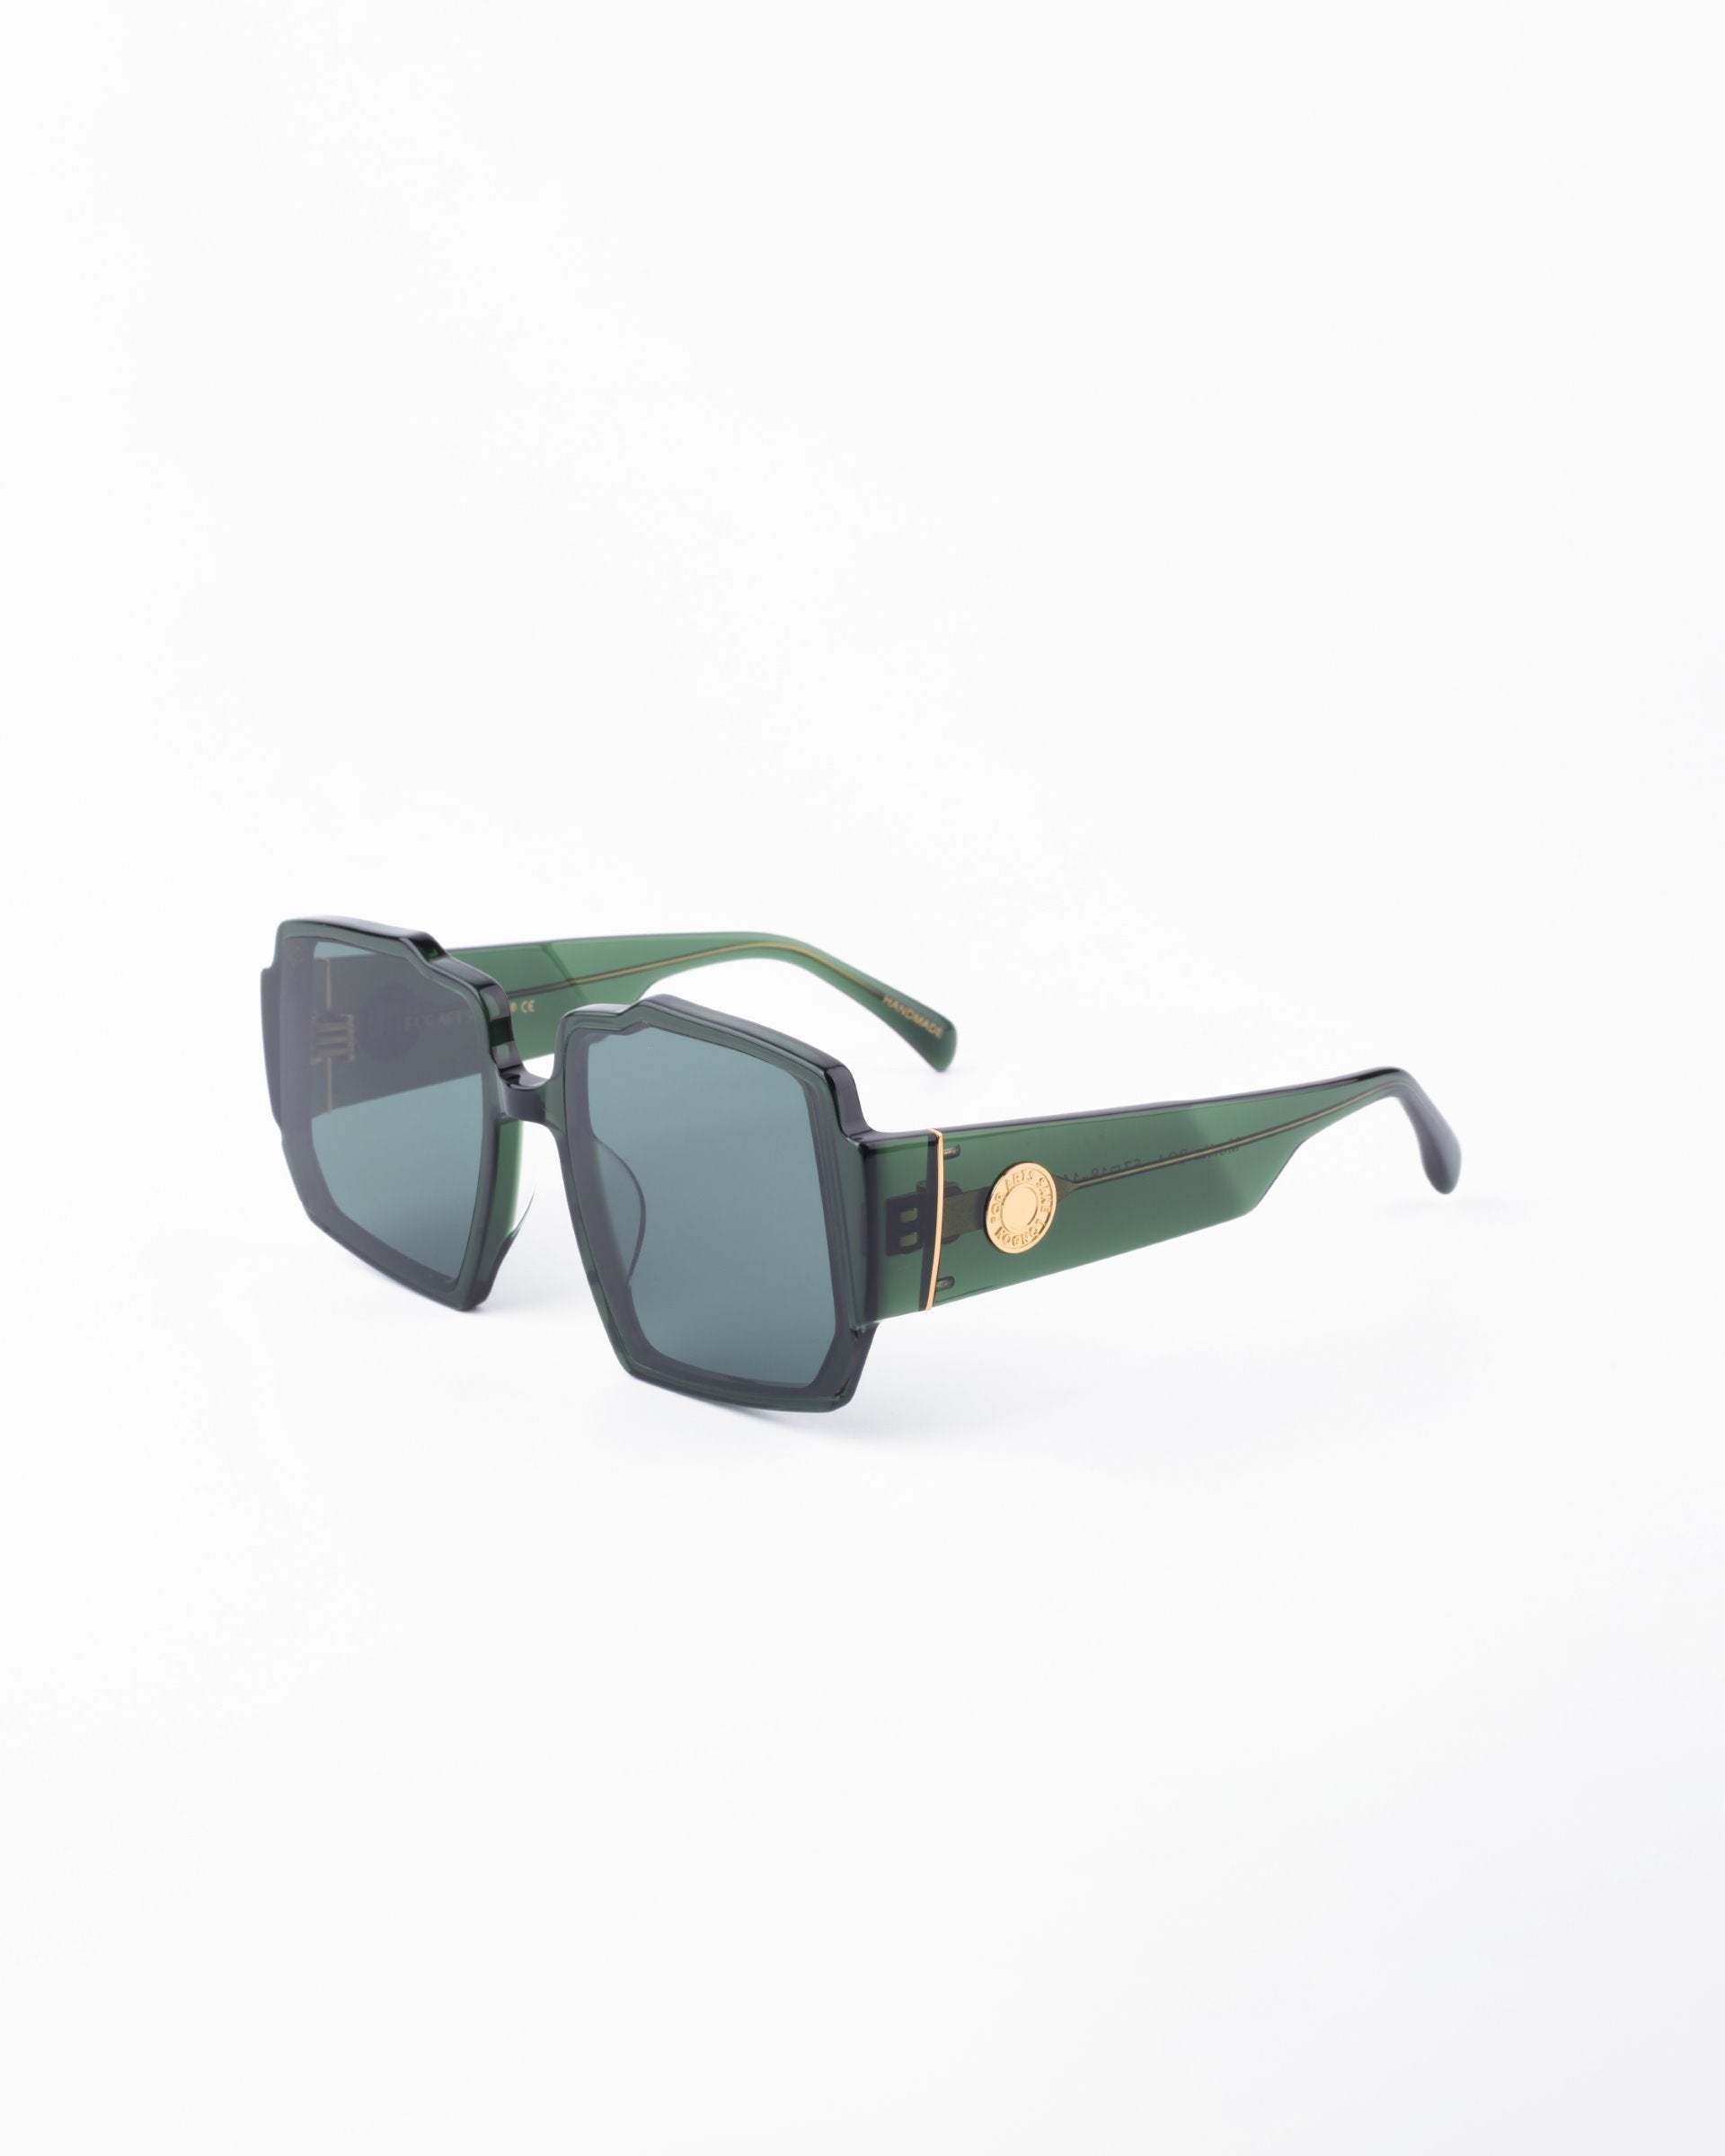 A pair of stylish sunglasses showcasing a chunky acetate frame with green hues, black UV-protected lenses, and gold-tone accents on the temples, photographed against a plain white background. The design features geometric details around the lenses. These are the Moritz by For Art&#39;s Sake®.